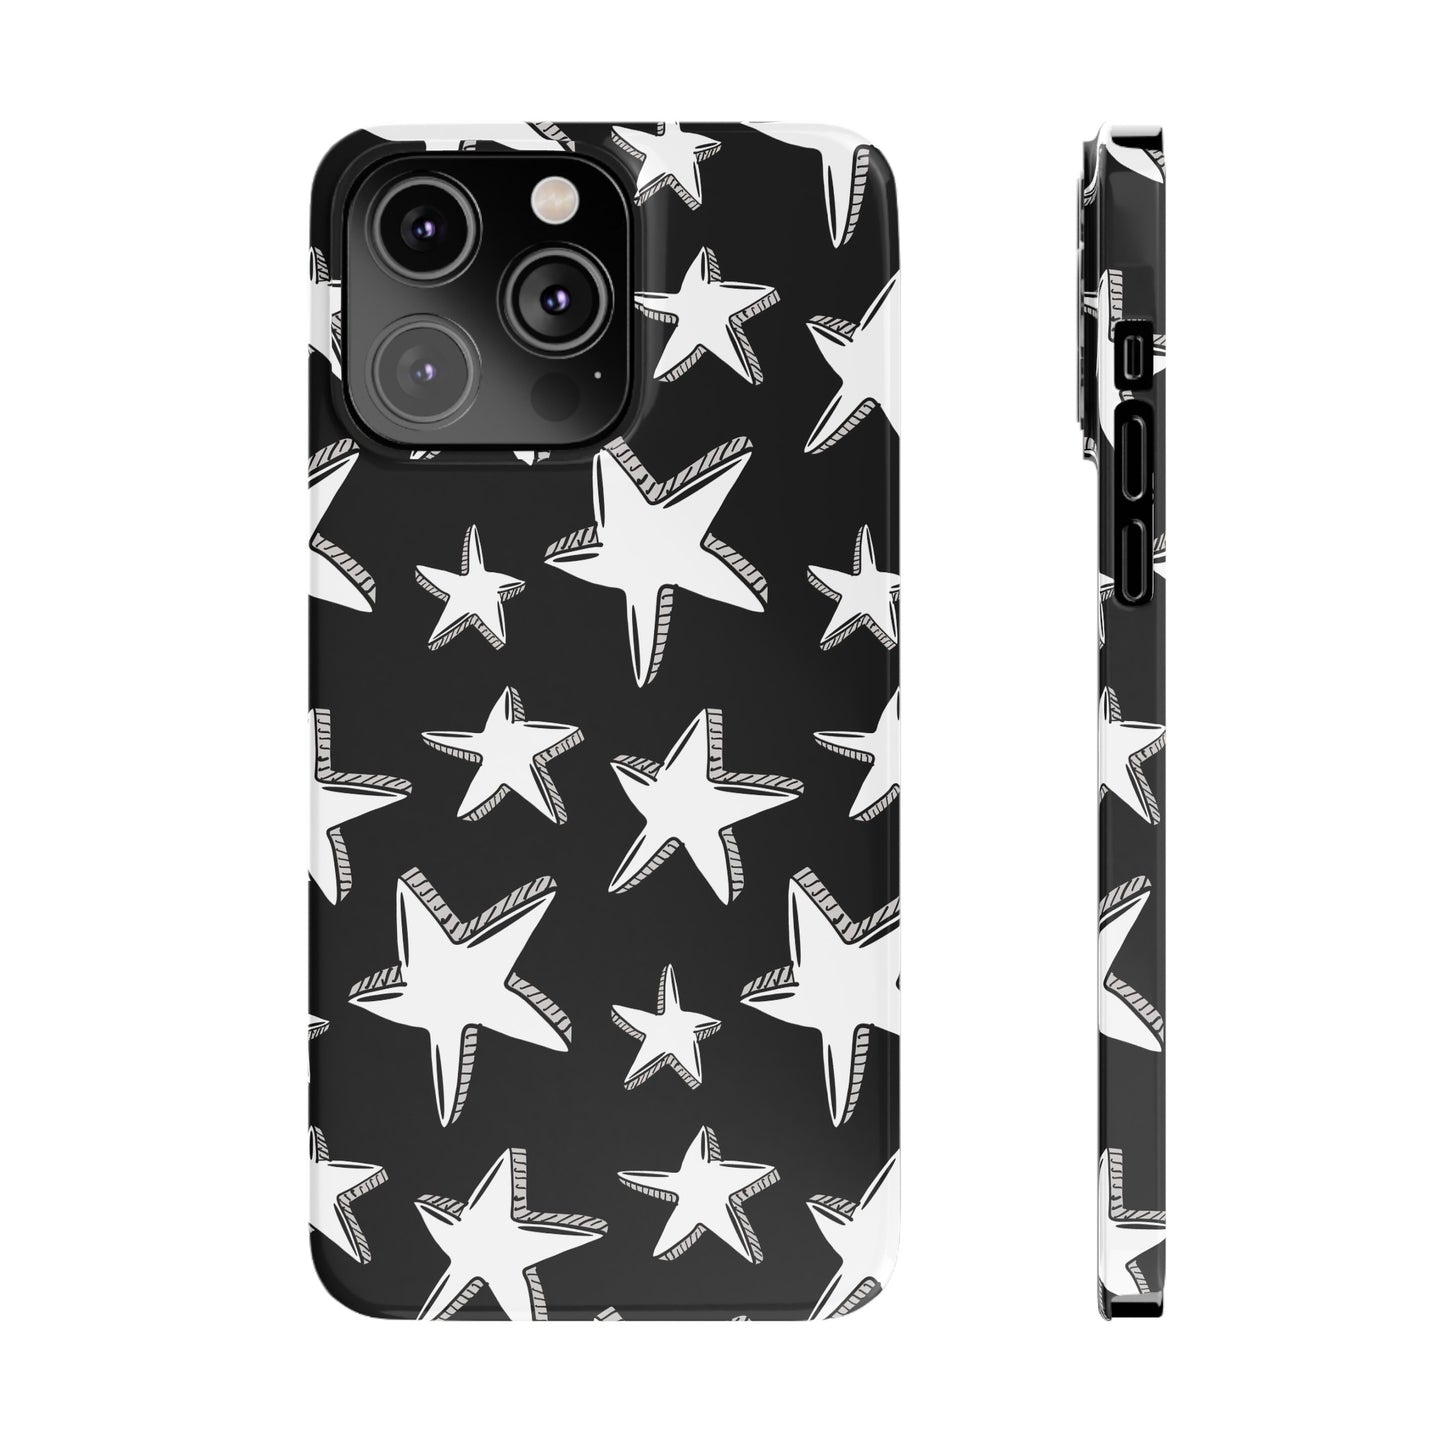 You are a star - Iphone Case